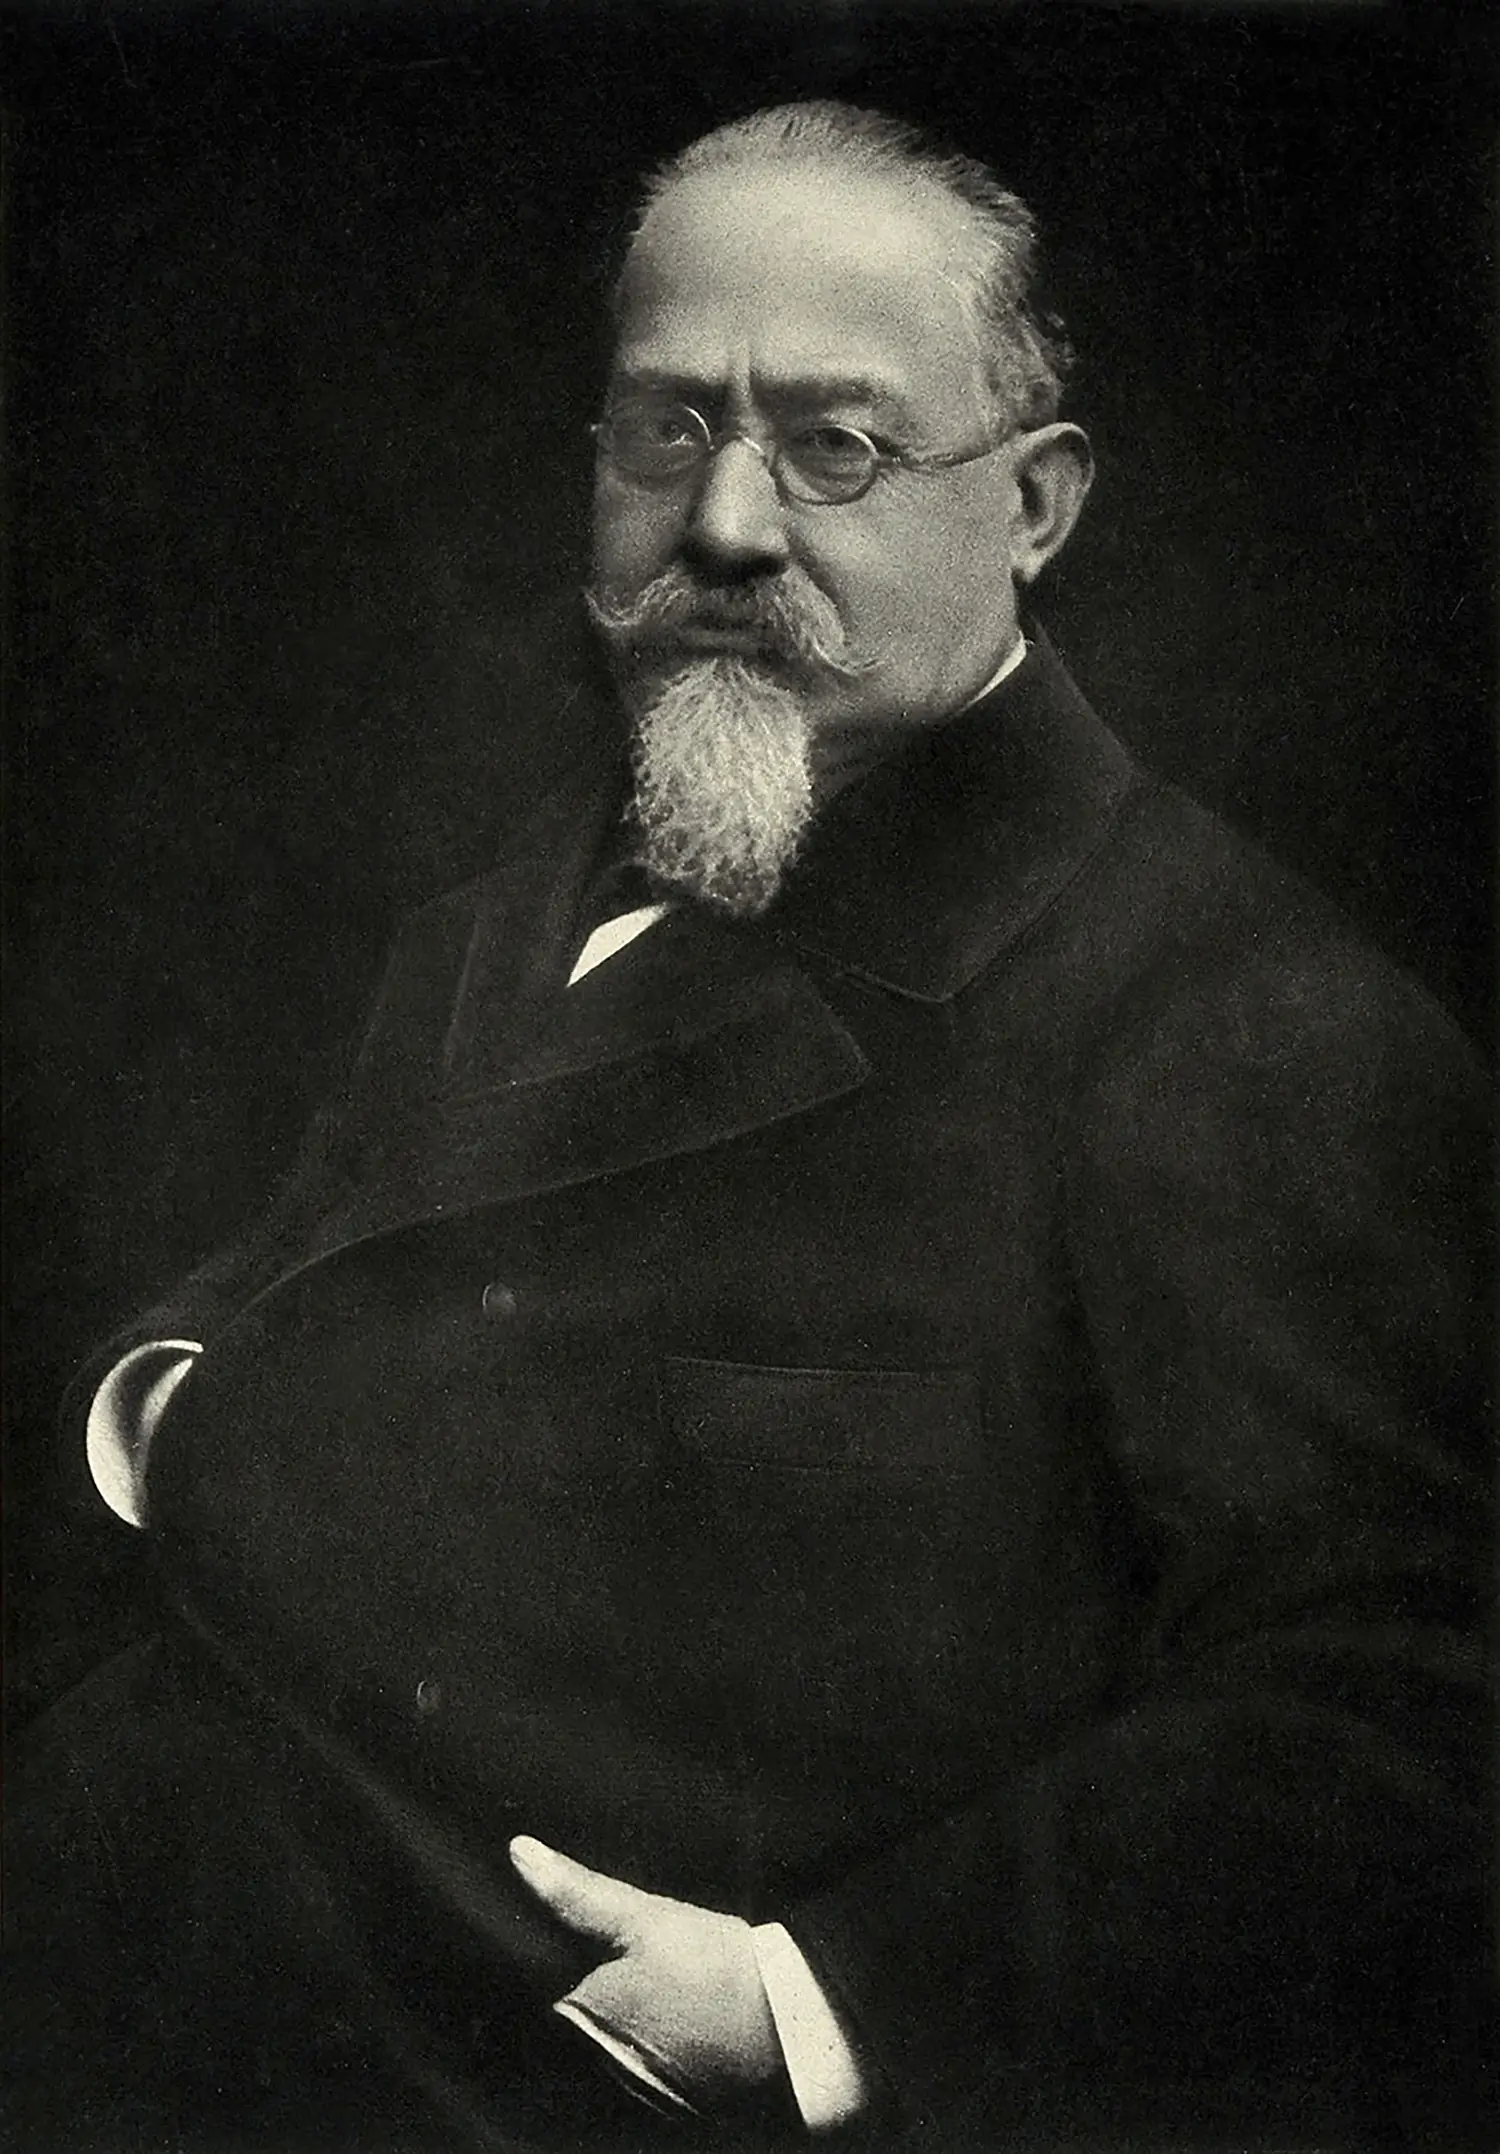 Portrait of Cesare Lombroso sporting glasses, a suit, a long goatee, and mustache.